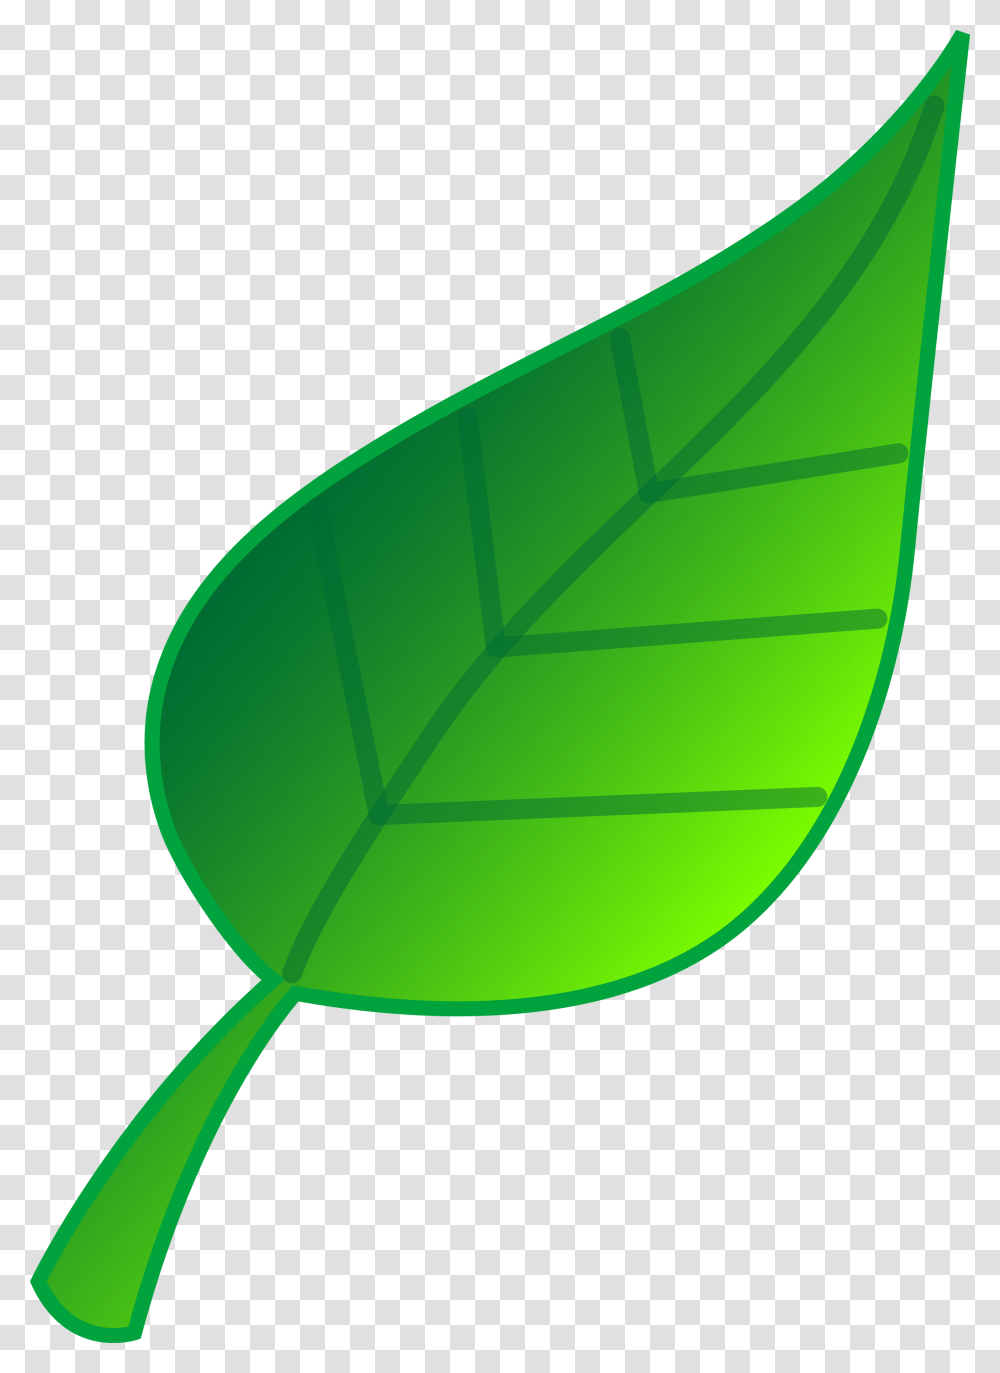 Simple Green Leaf Vector Art Free Clipart Free Image, Plant, Veins Transparent Png